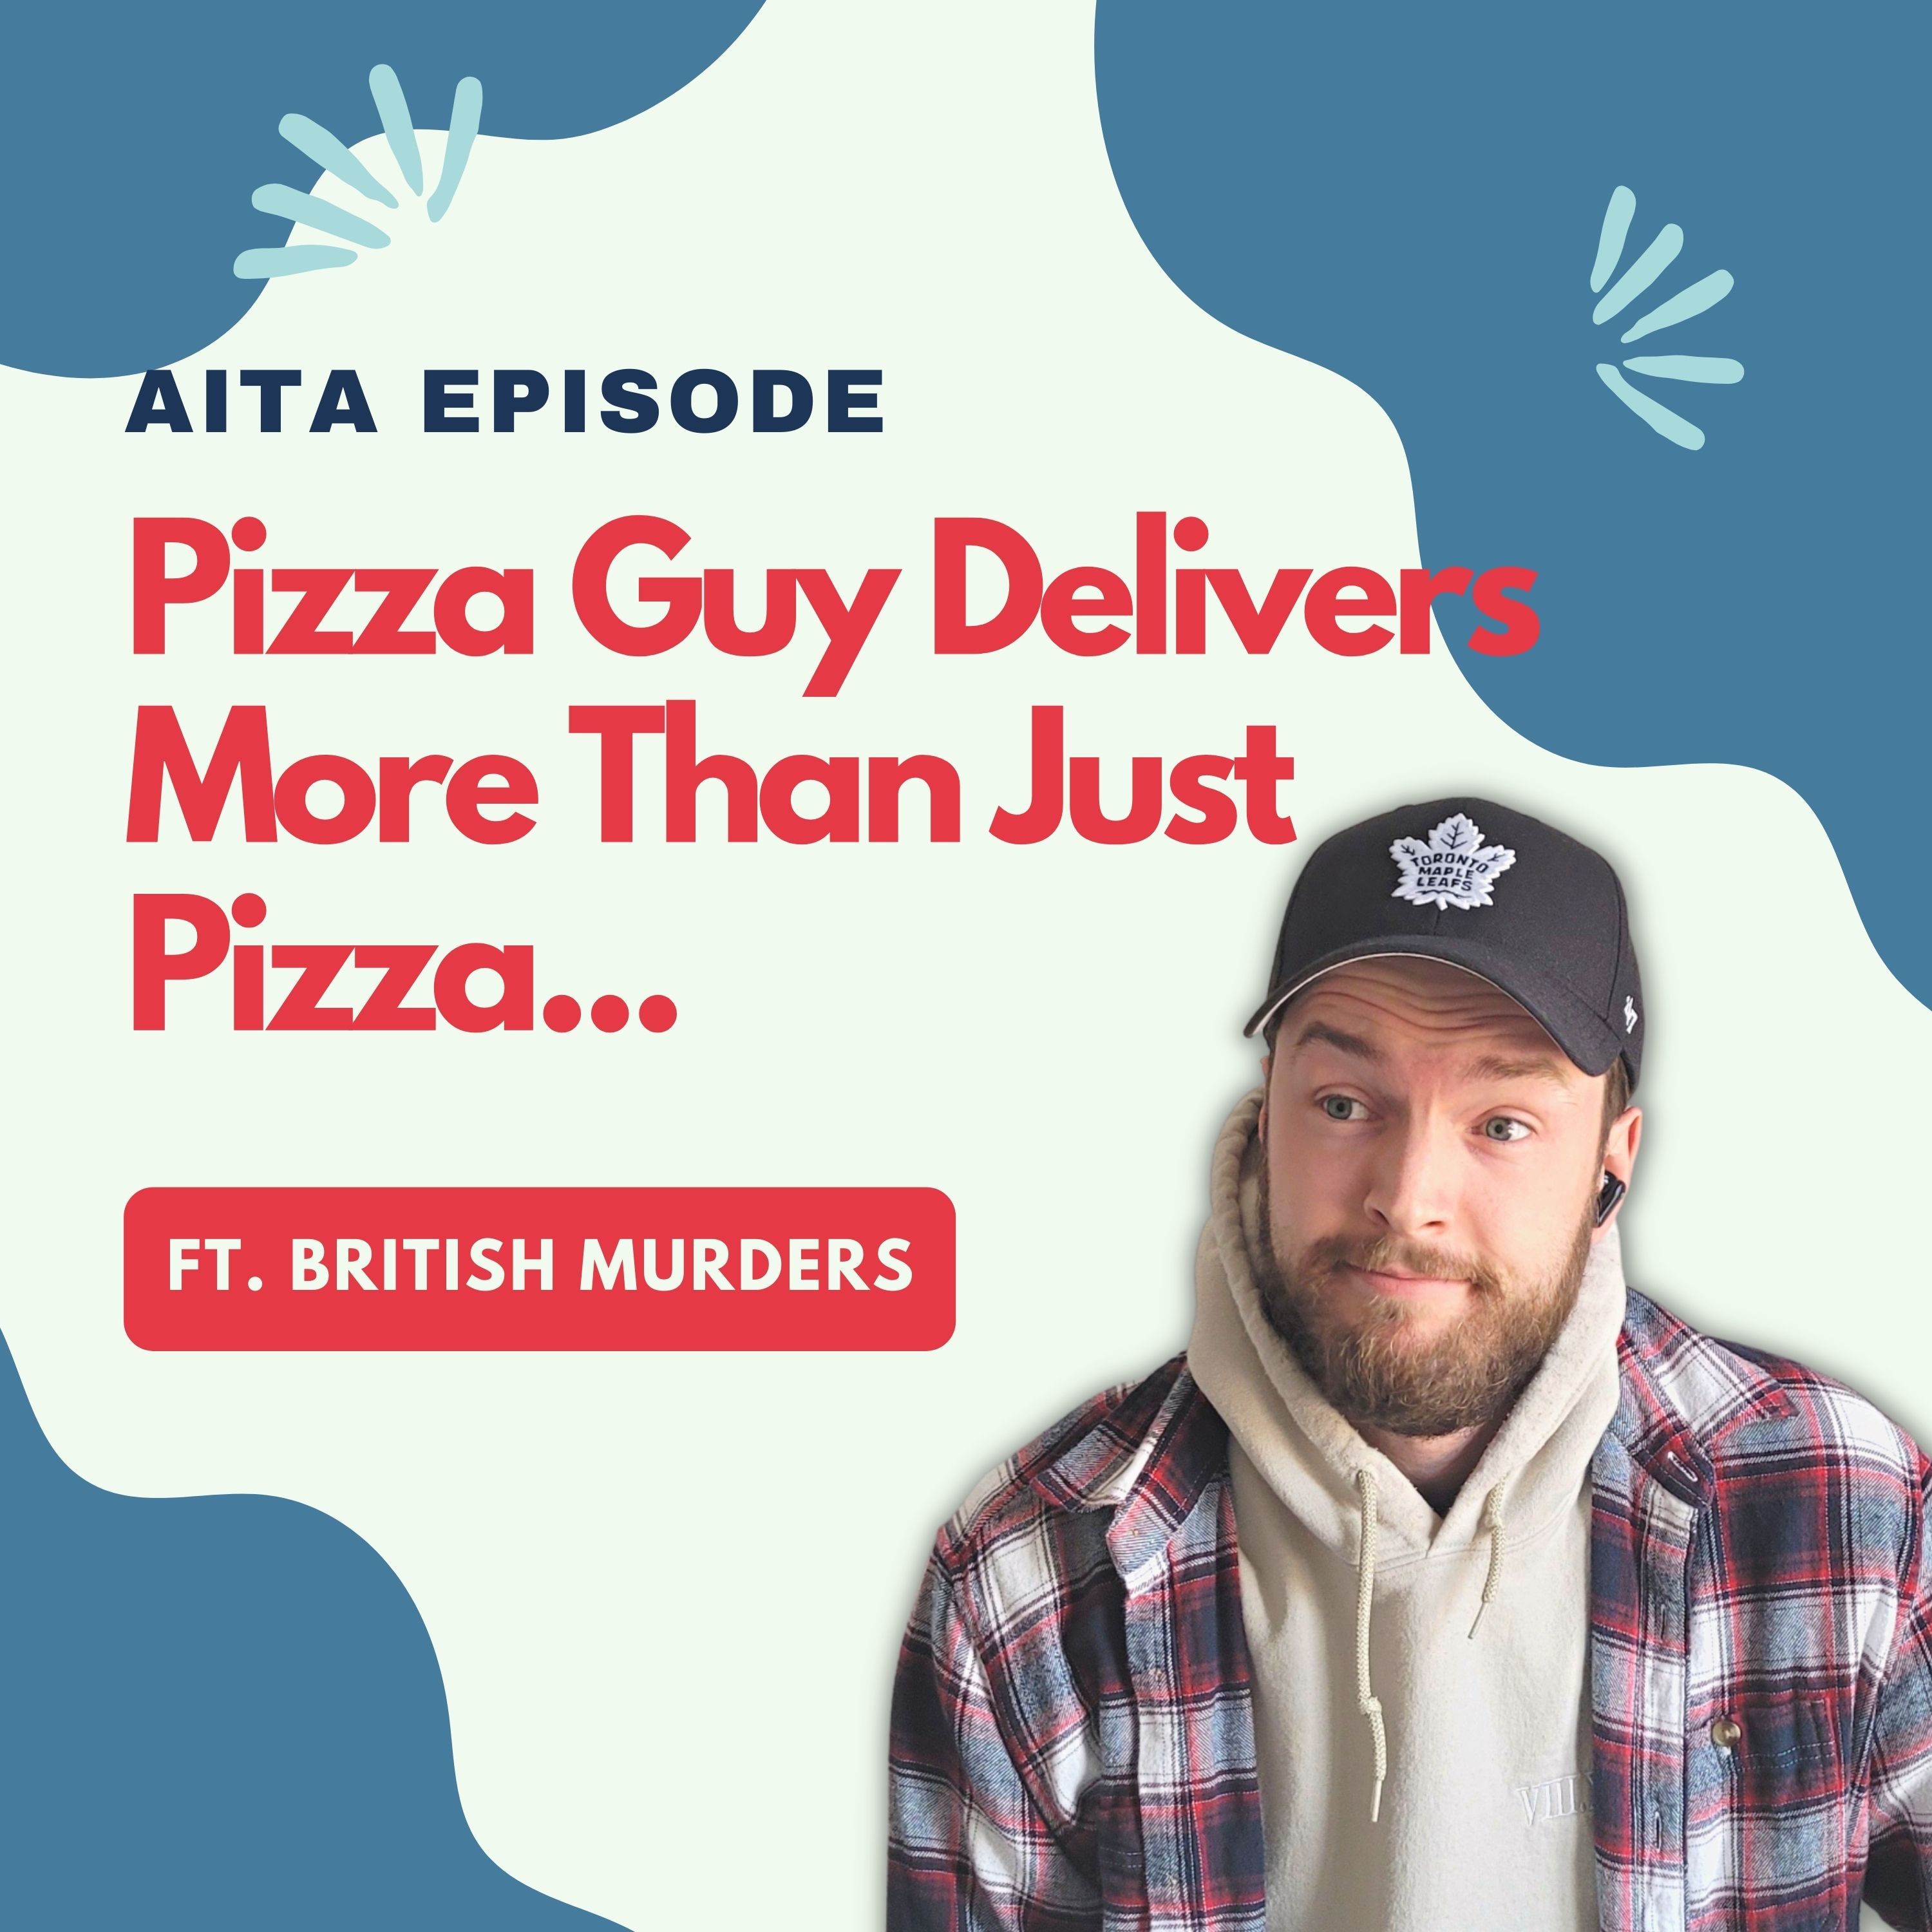 Am I The Asshole | A Pizza Guy Delivers More Than Just Pizza!